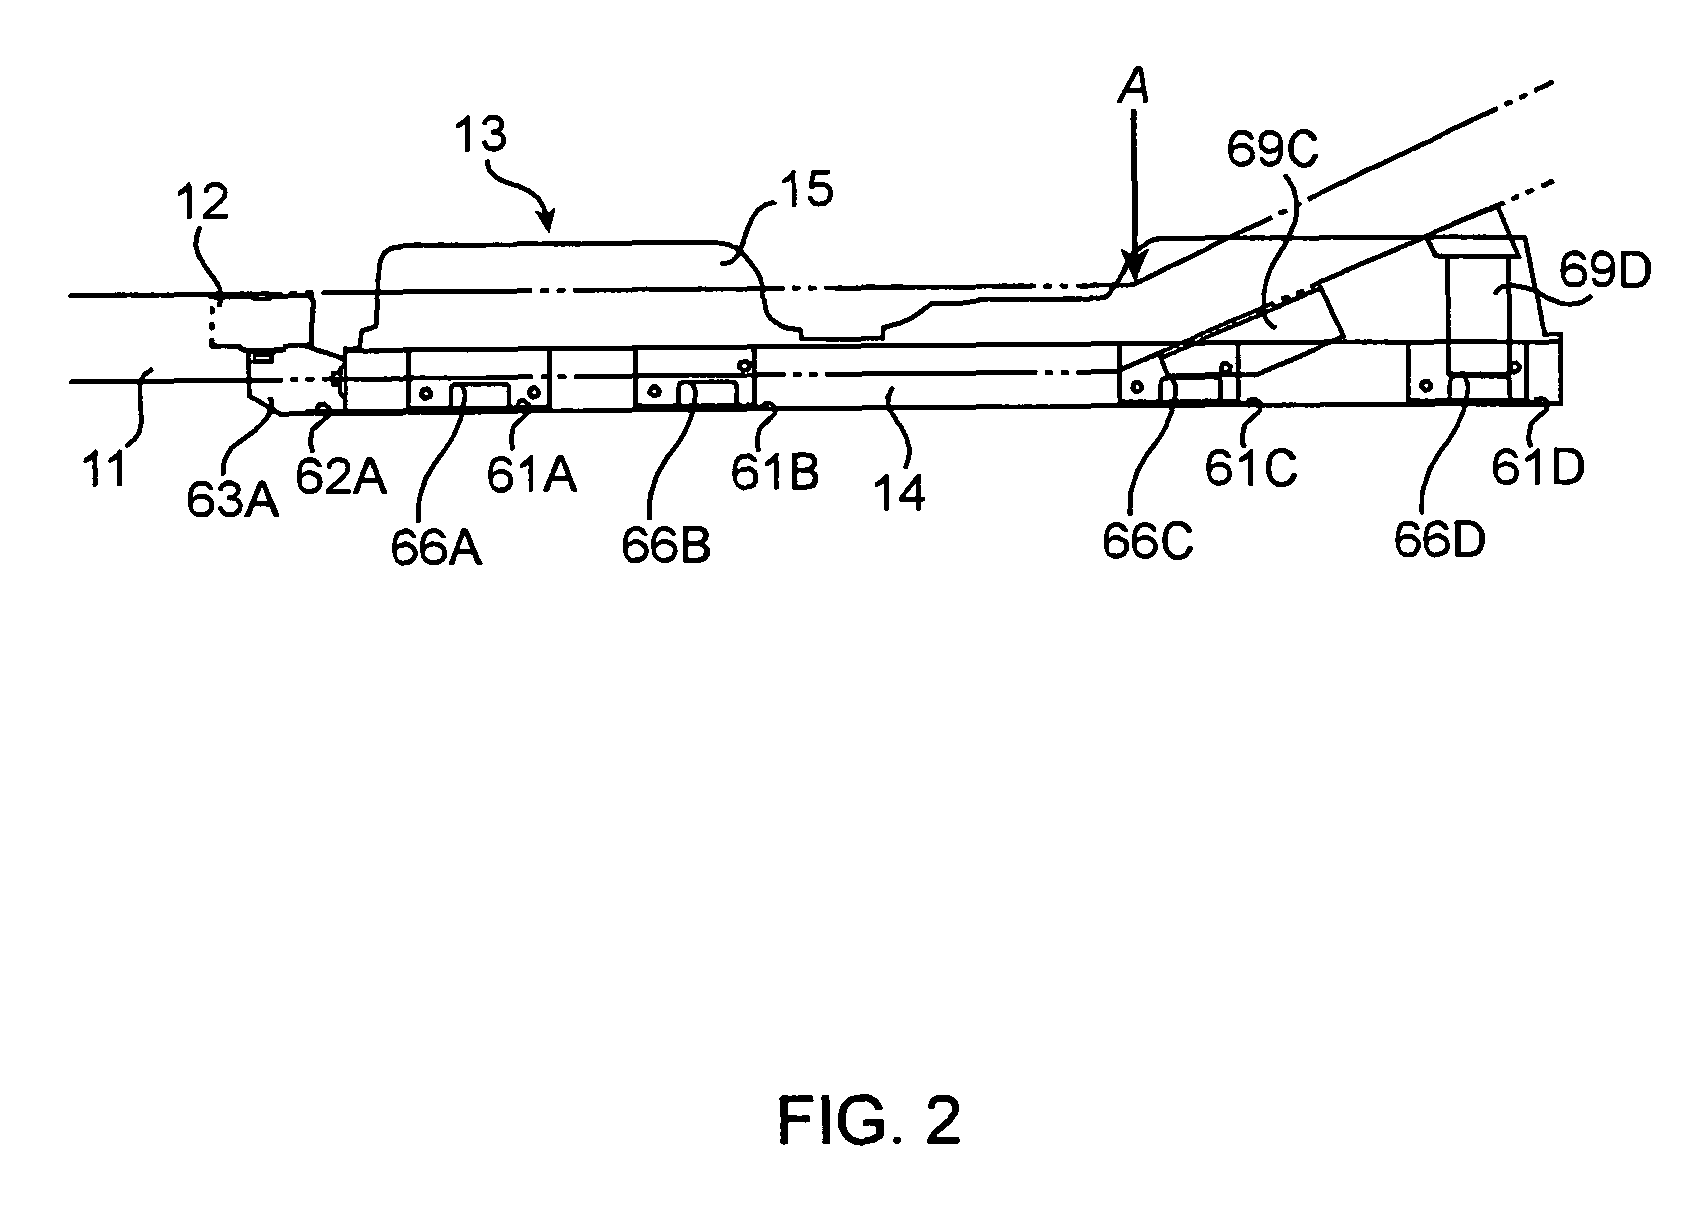 Structure for mounting batteries to electric vehicles